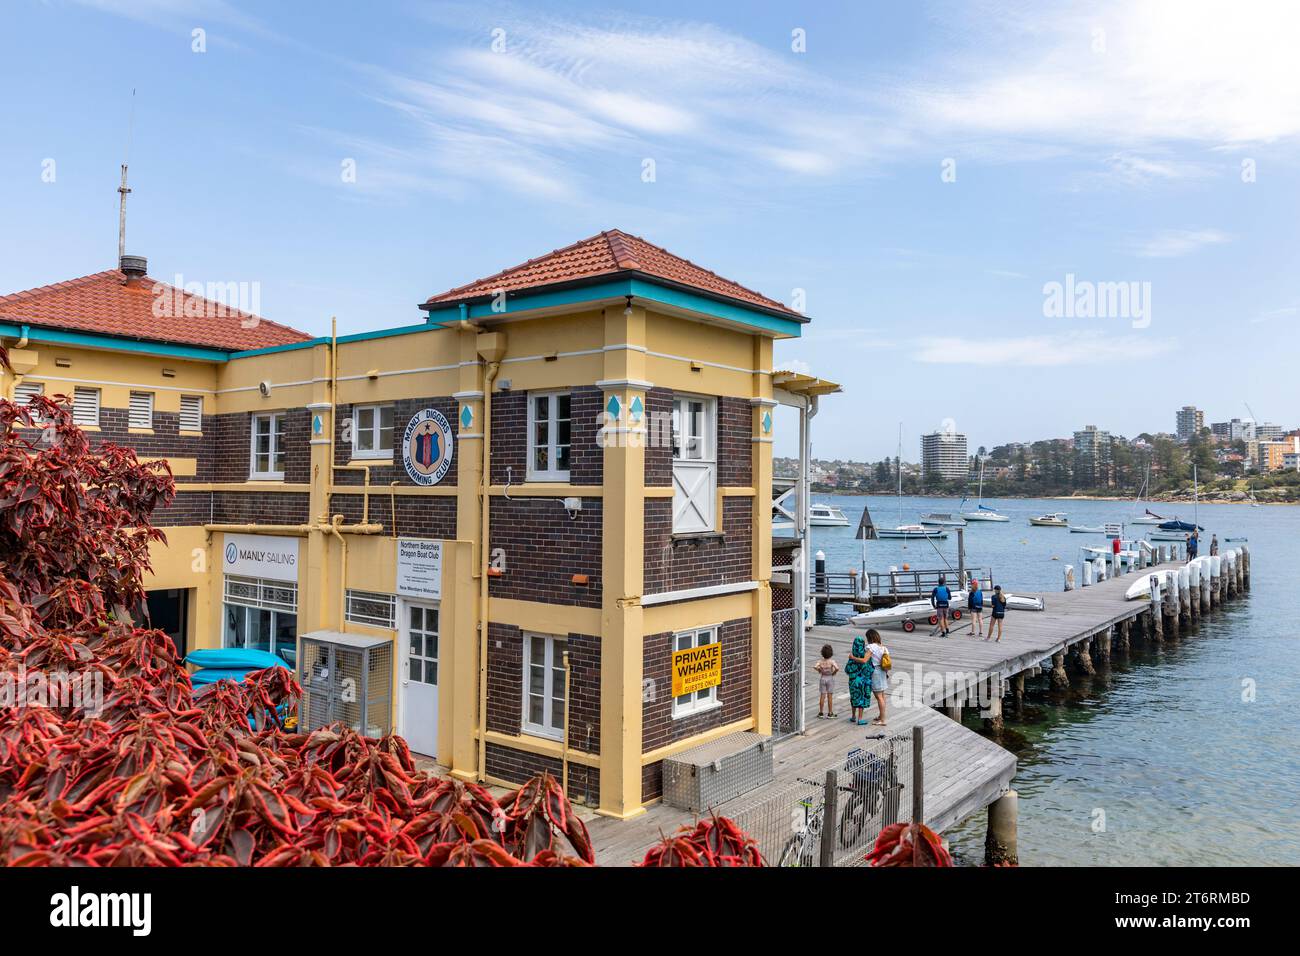 Manly Beach Sydney Australia, Manly diggers swimming club and sailing club building on the harbour,Sydney,NSW,Australia Stock Photo